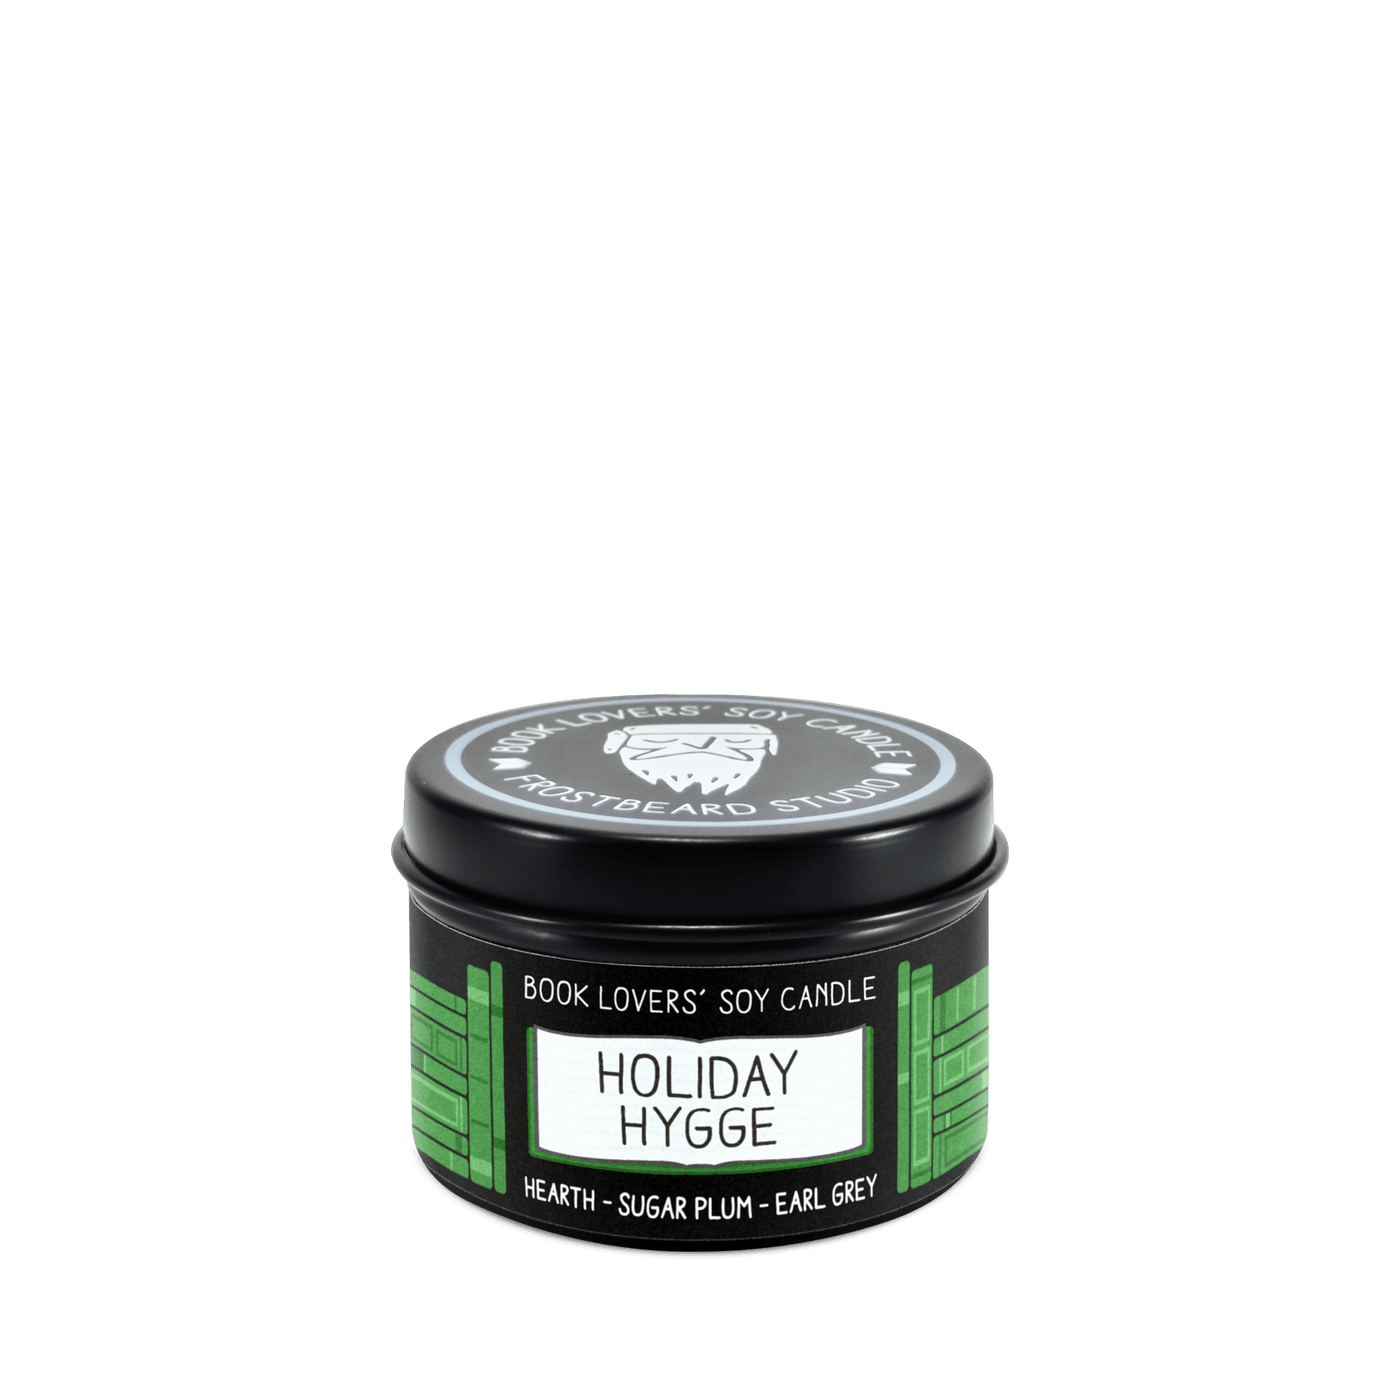 Holiday Hygge  -  2 oz Tin  -  Book Lovers' Soy Candle  -  Frostbeard Studio